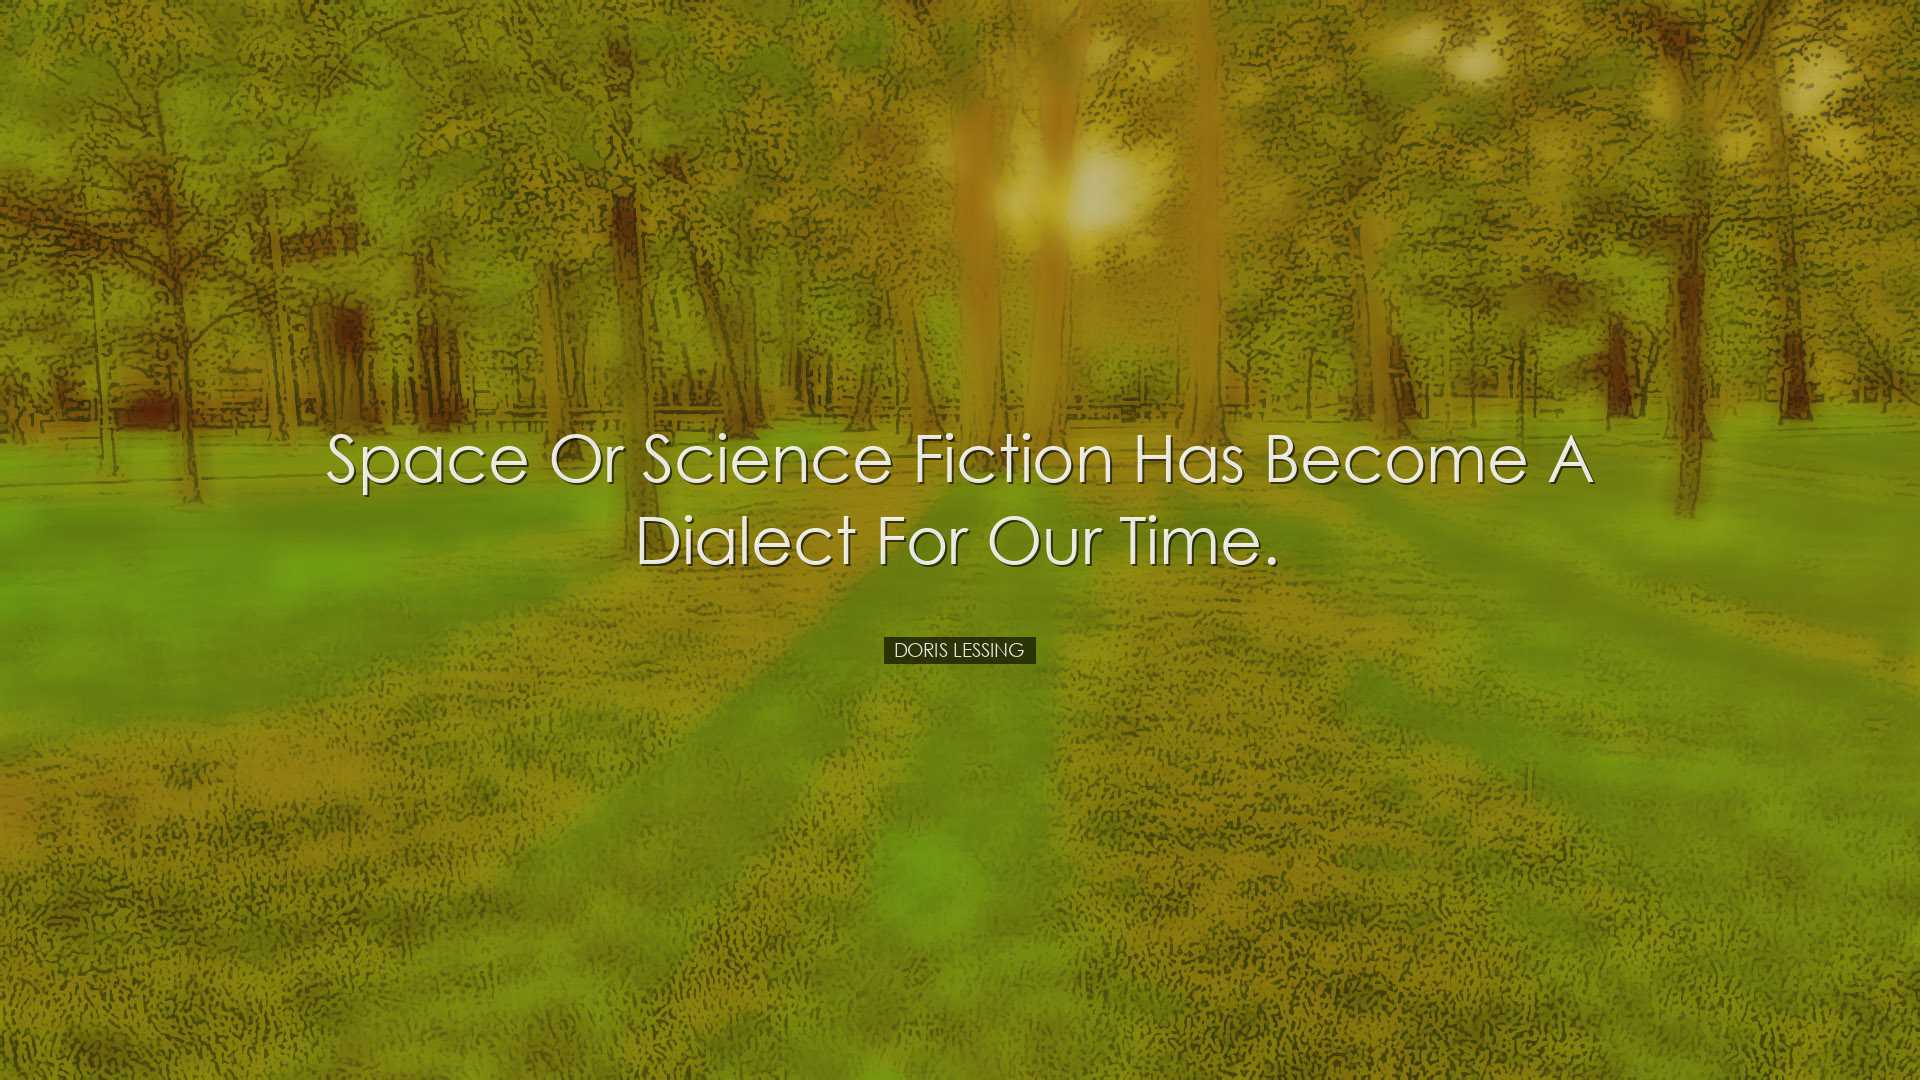 Space or science fiction has become a dialect for our time. - Dori